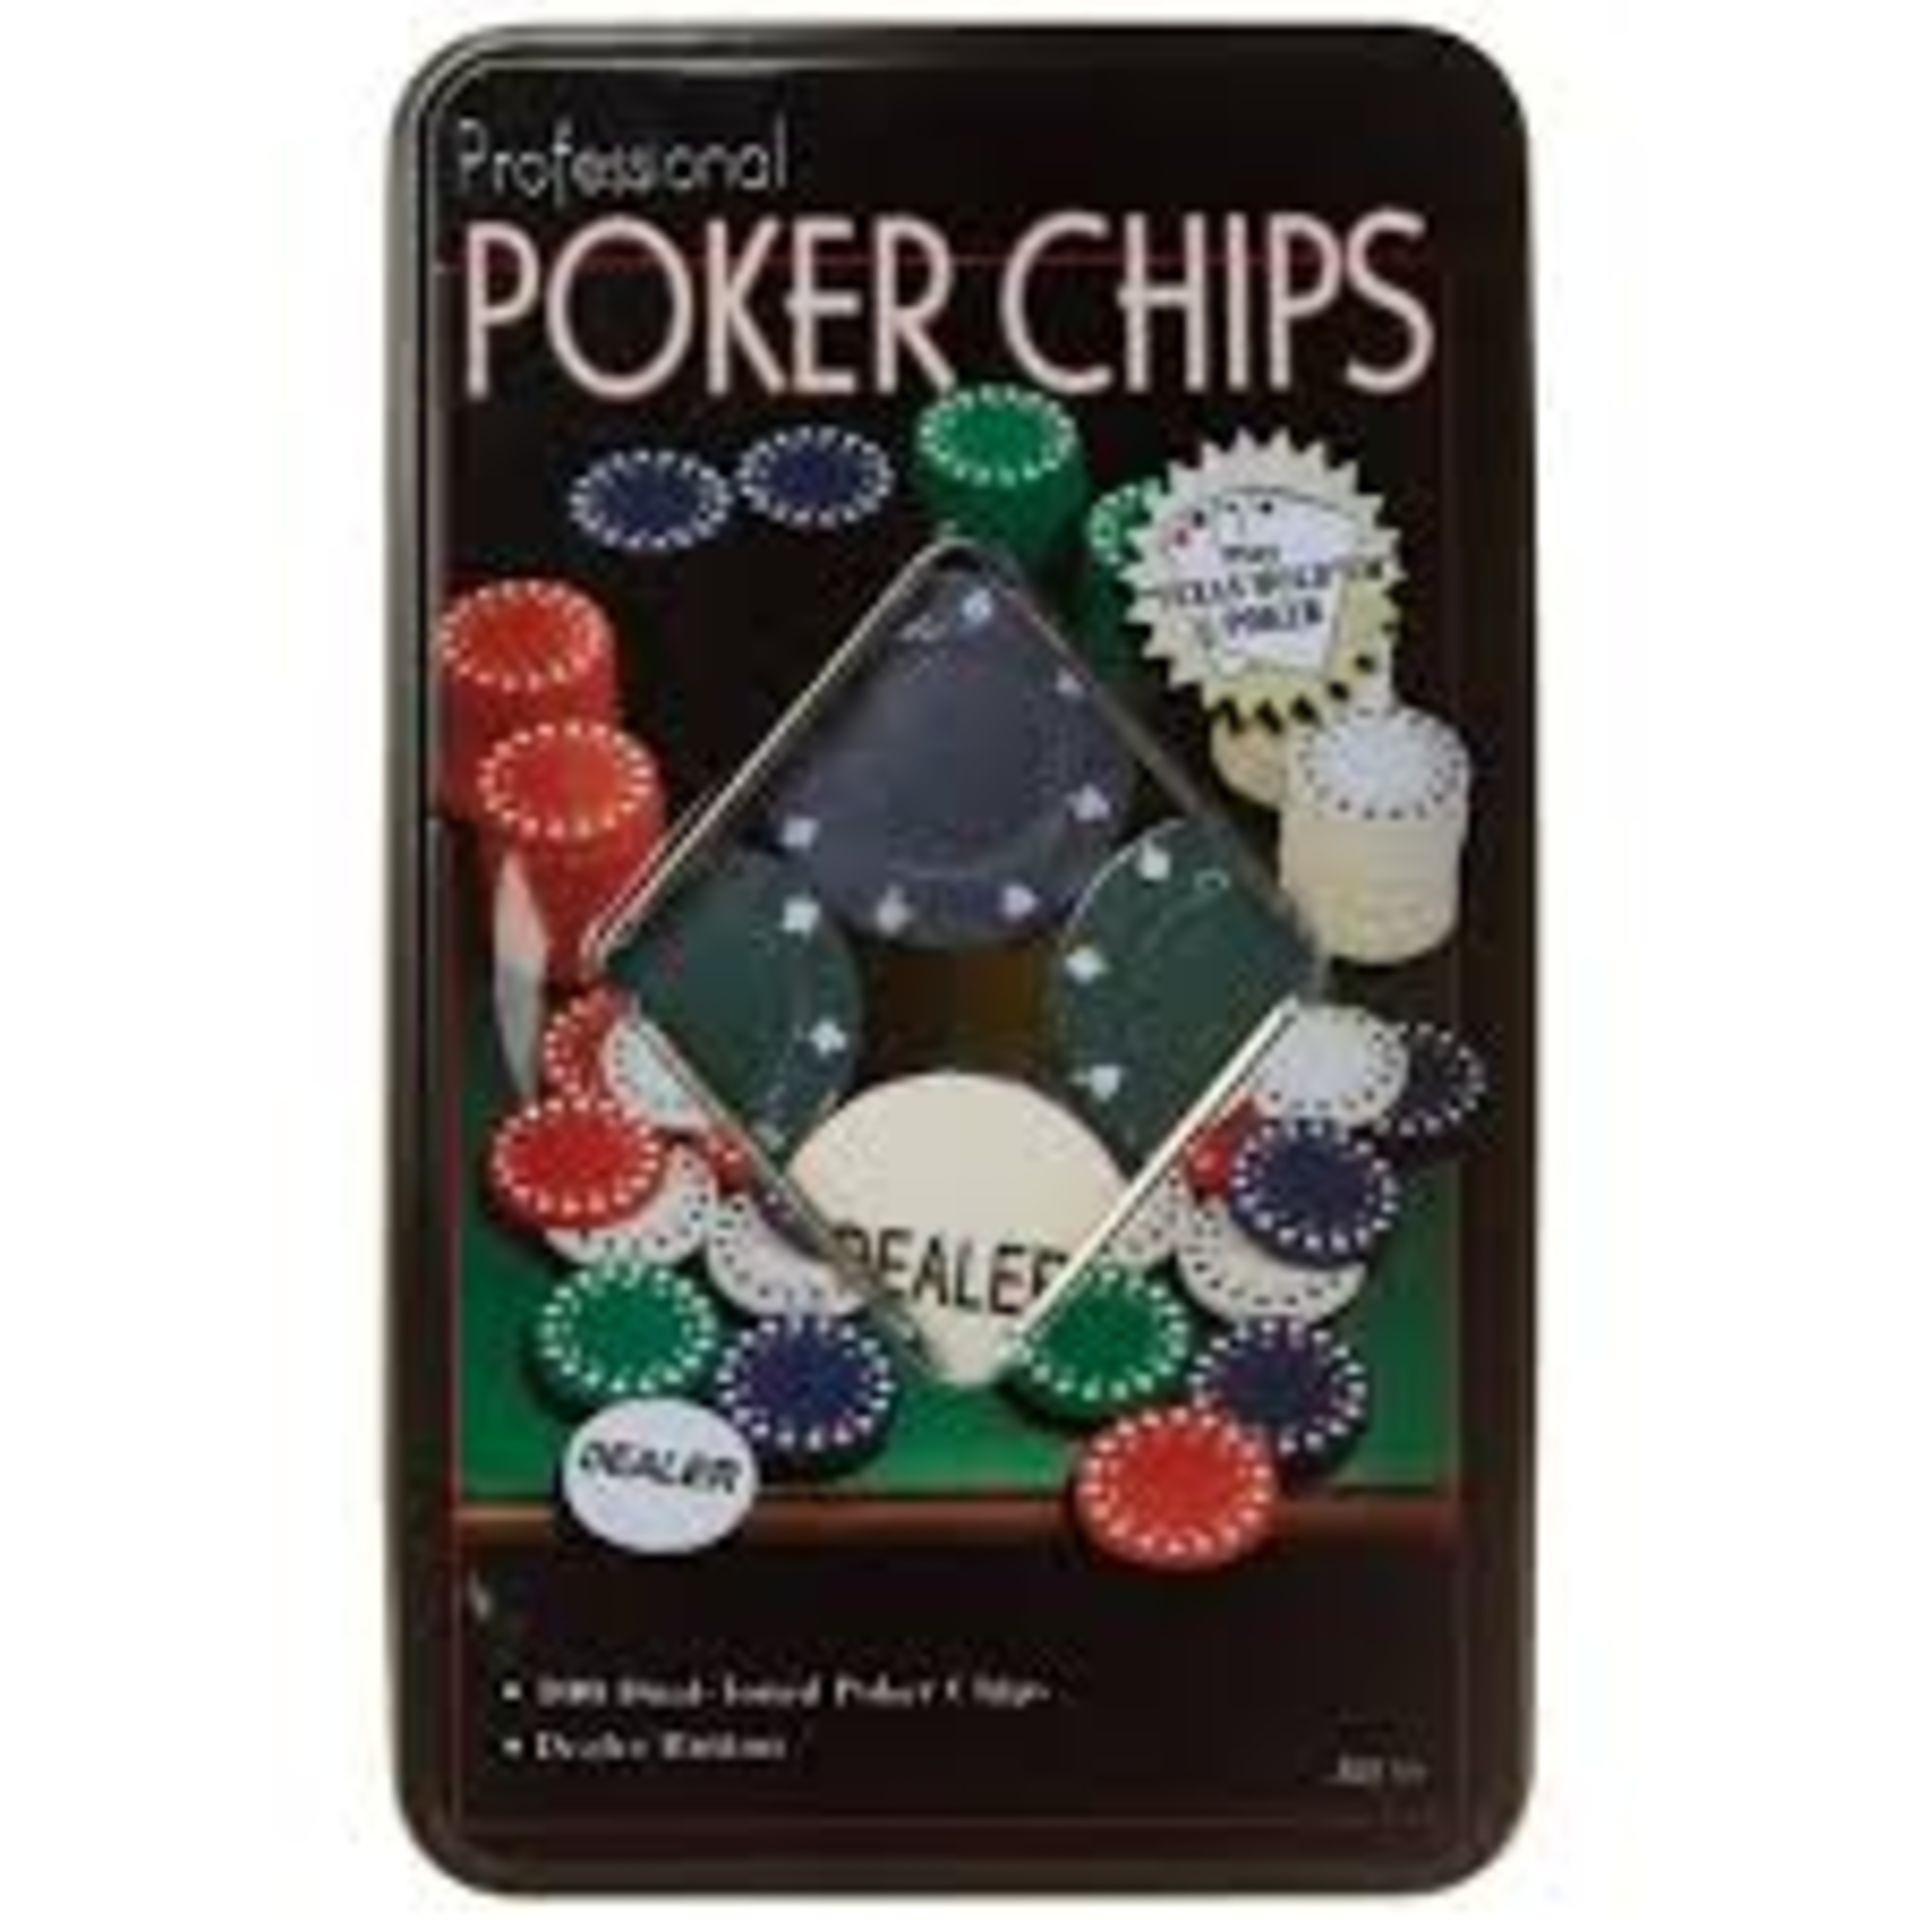 V *TRADE QTY* Brand New Box Of 100 Dual-Toned Professional Poker Chips Includes Dealer Button X 3